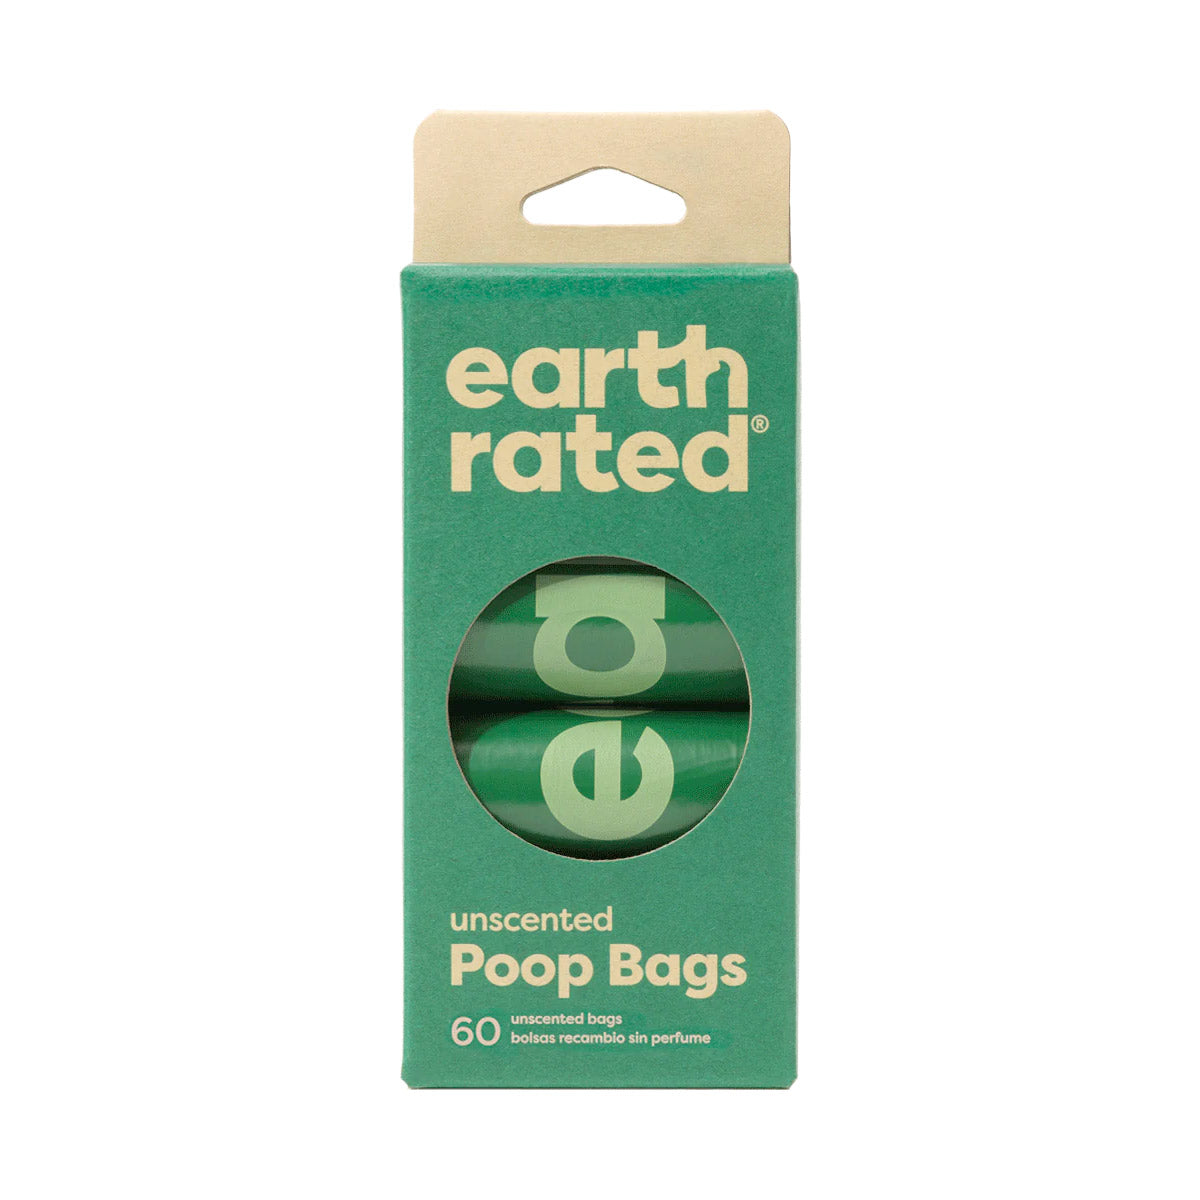 EARTH RATED Dog Poo Bags Refill Pack